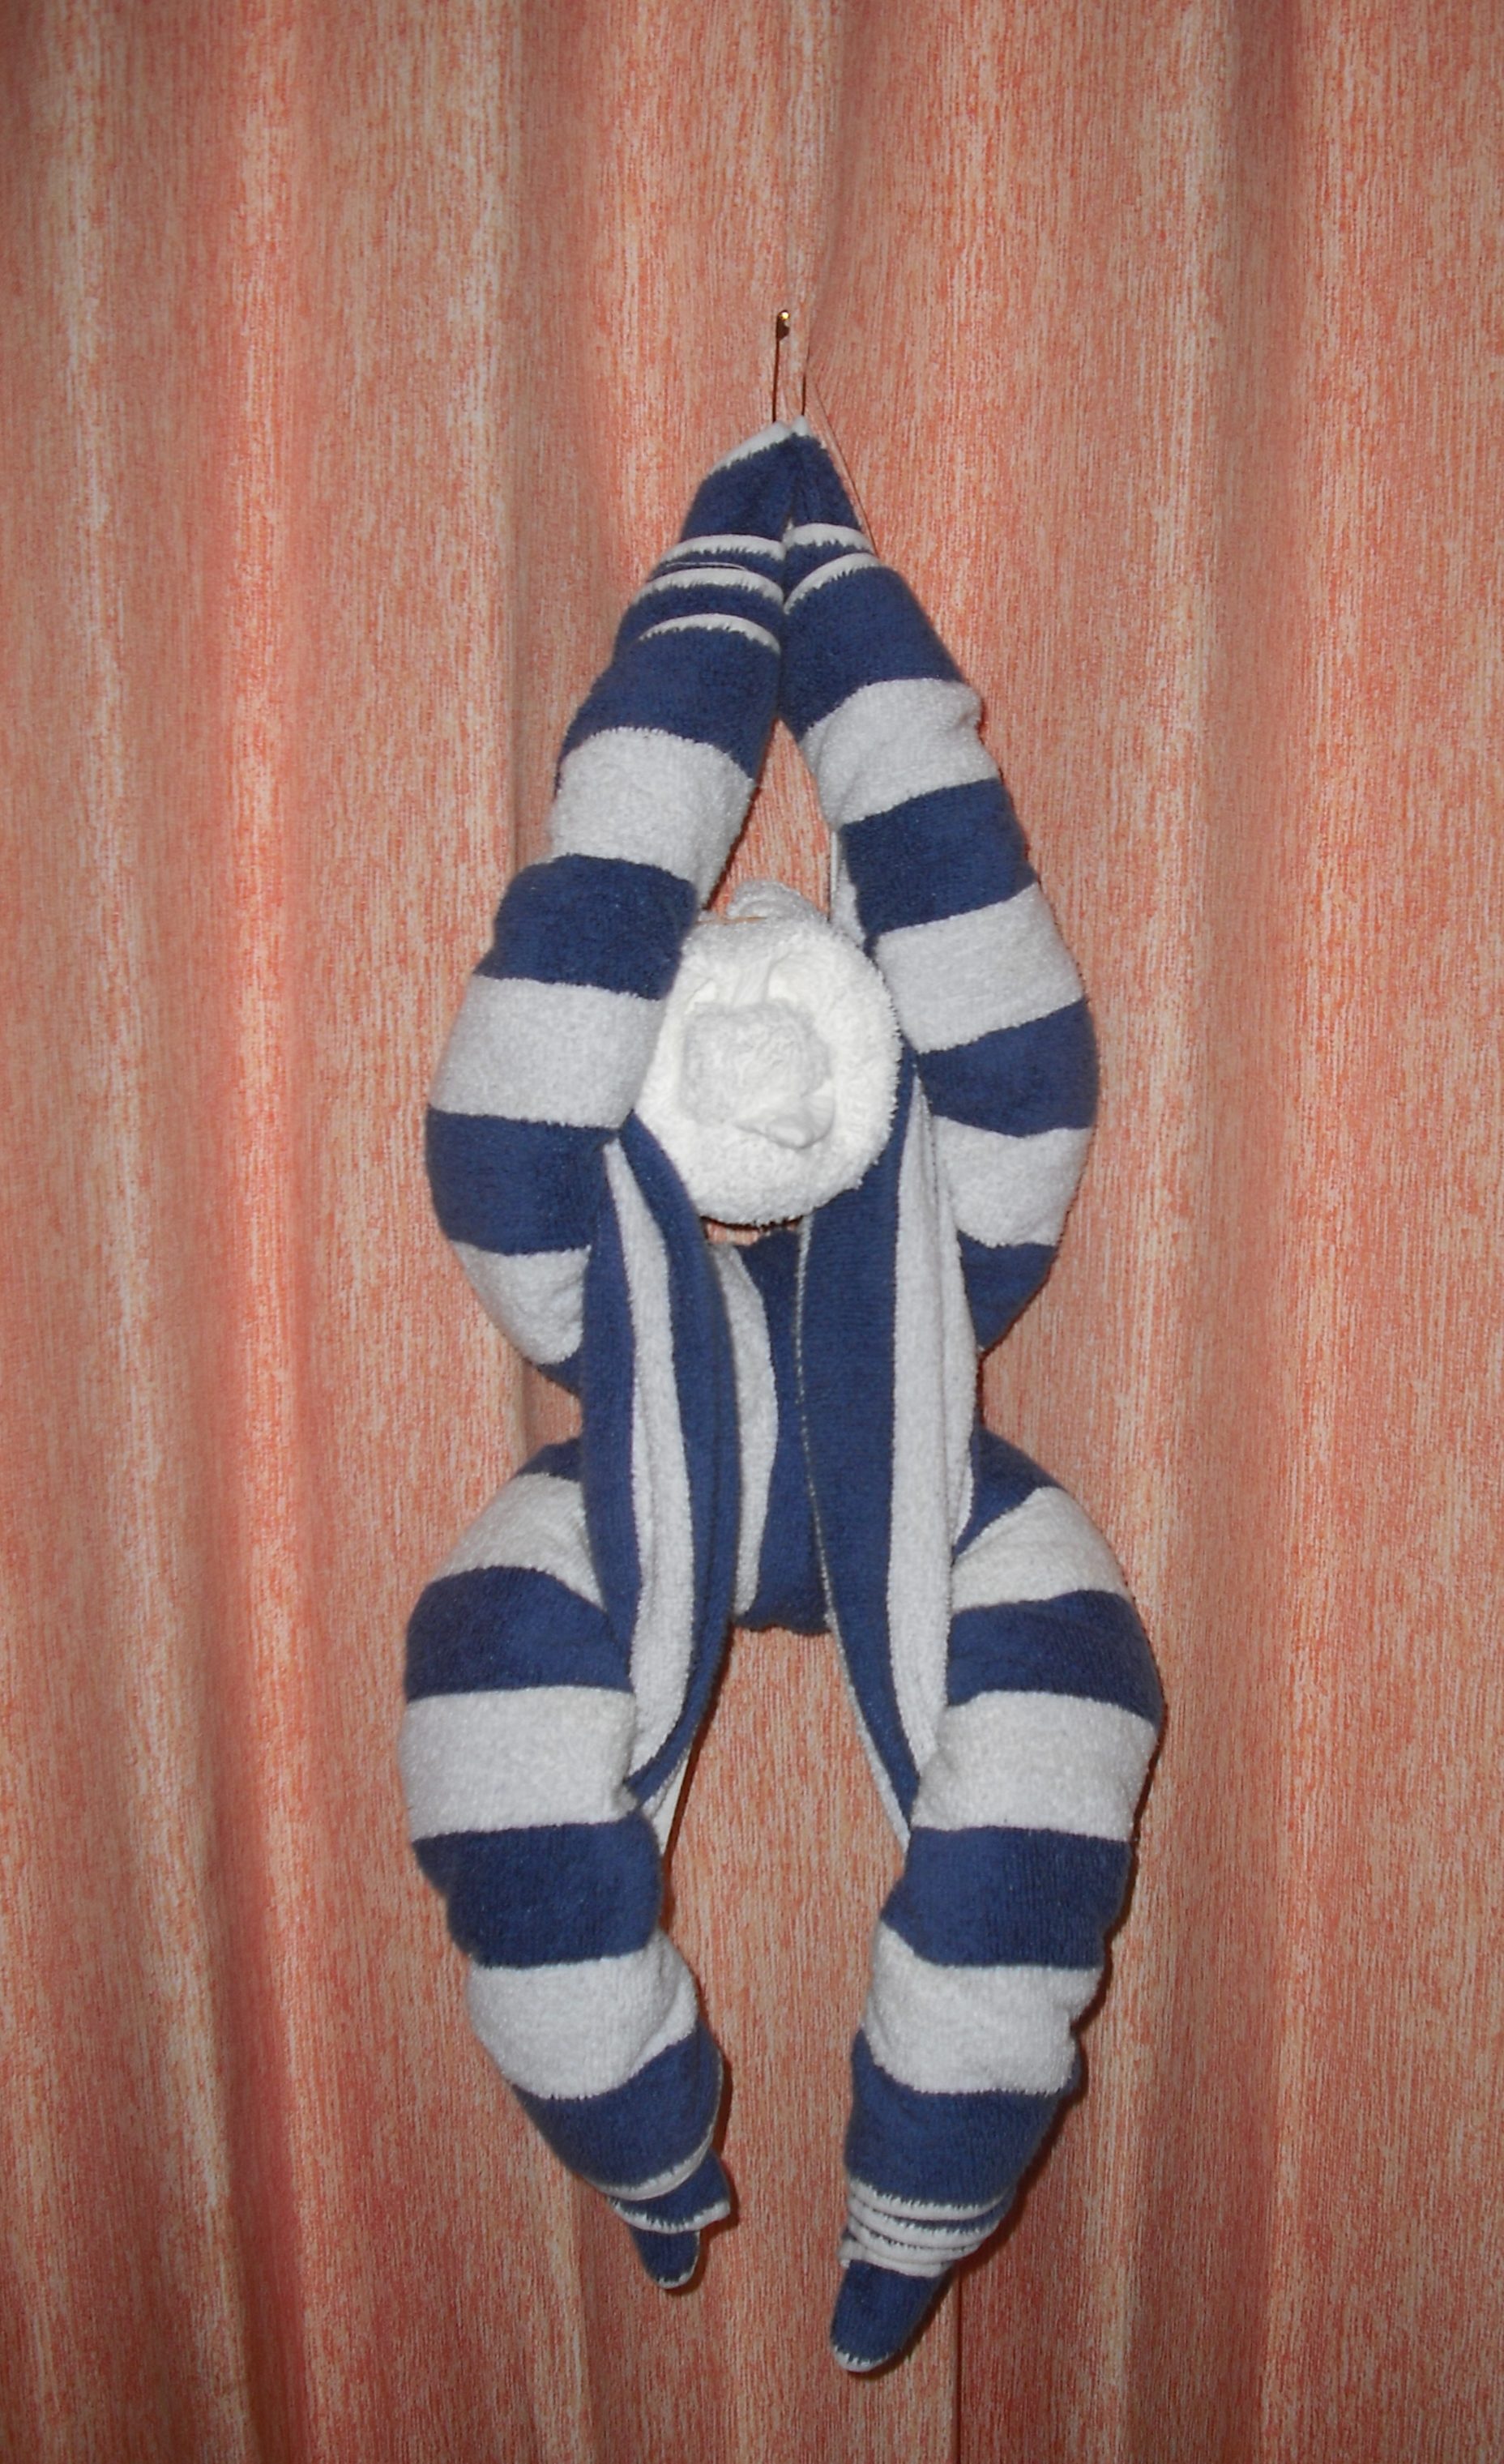 a towel monkey from a curtain